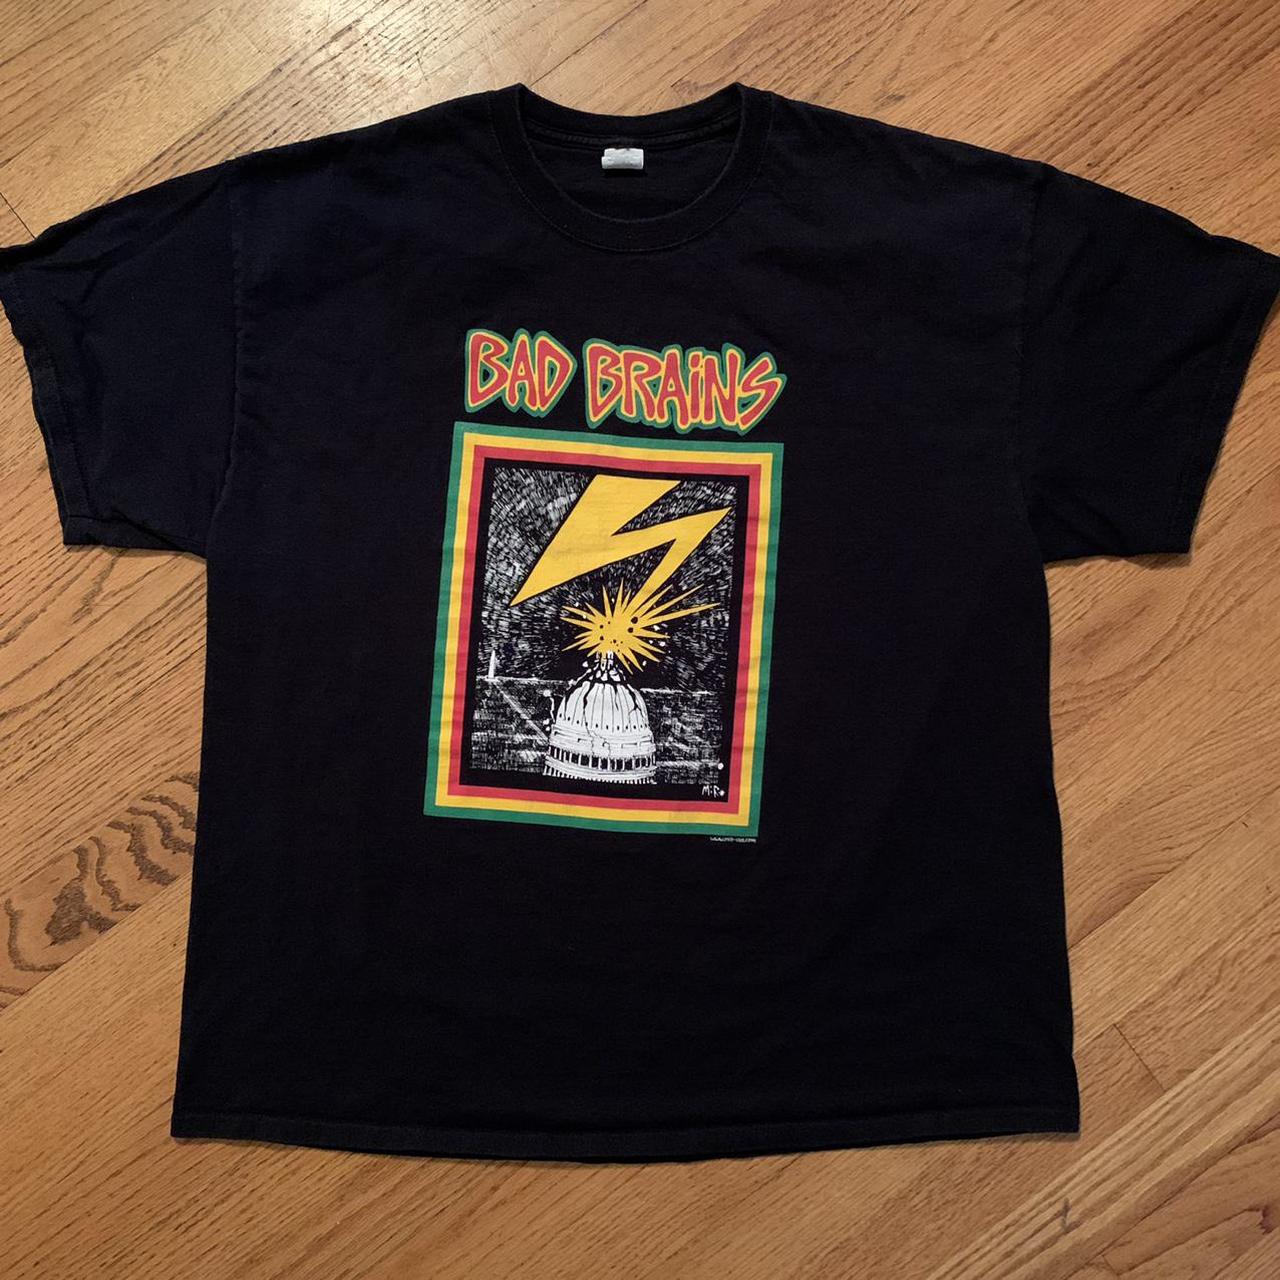 Product Image 1 - Bad Brains t-shirt. FREE SHIPPING!
Size:XL
Arm